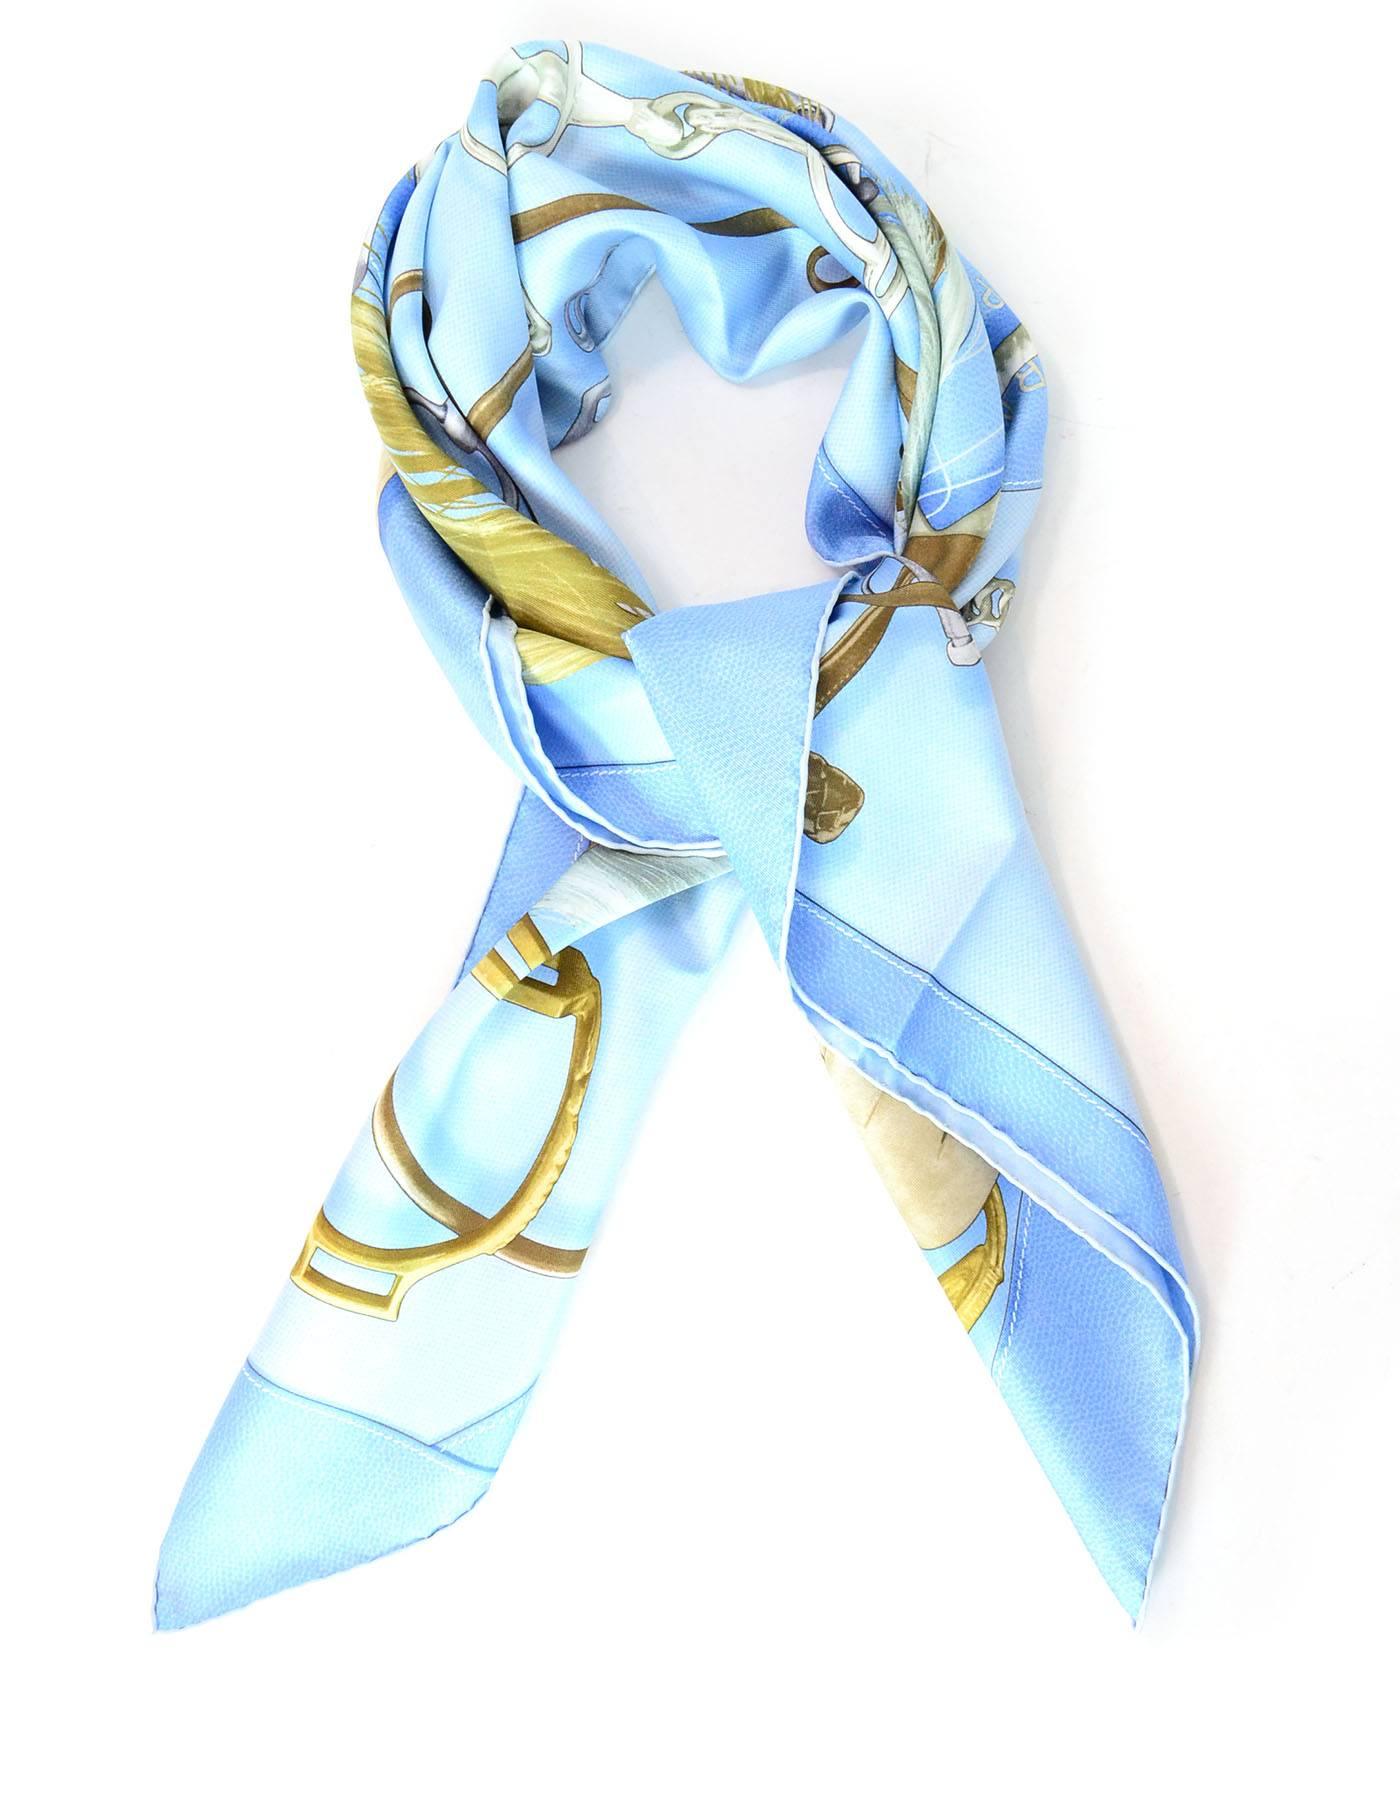 Hermes Blue Projects Carres Silk 90cm Scarf

Made In: France
Color: Blue
Composition: 100% Silk
Retail Price: $395 + tax
Overall Condition: Excellent pre-owned condition
Included: Hermes box

Measurements:
Length: 35